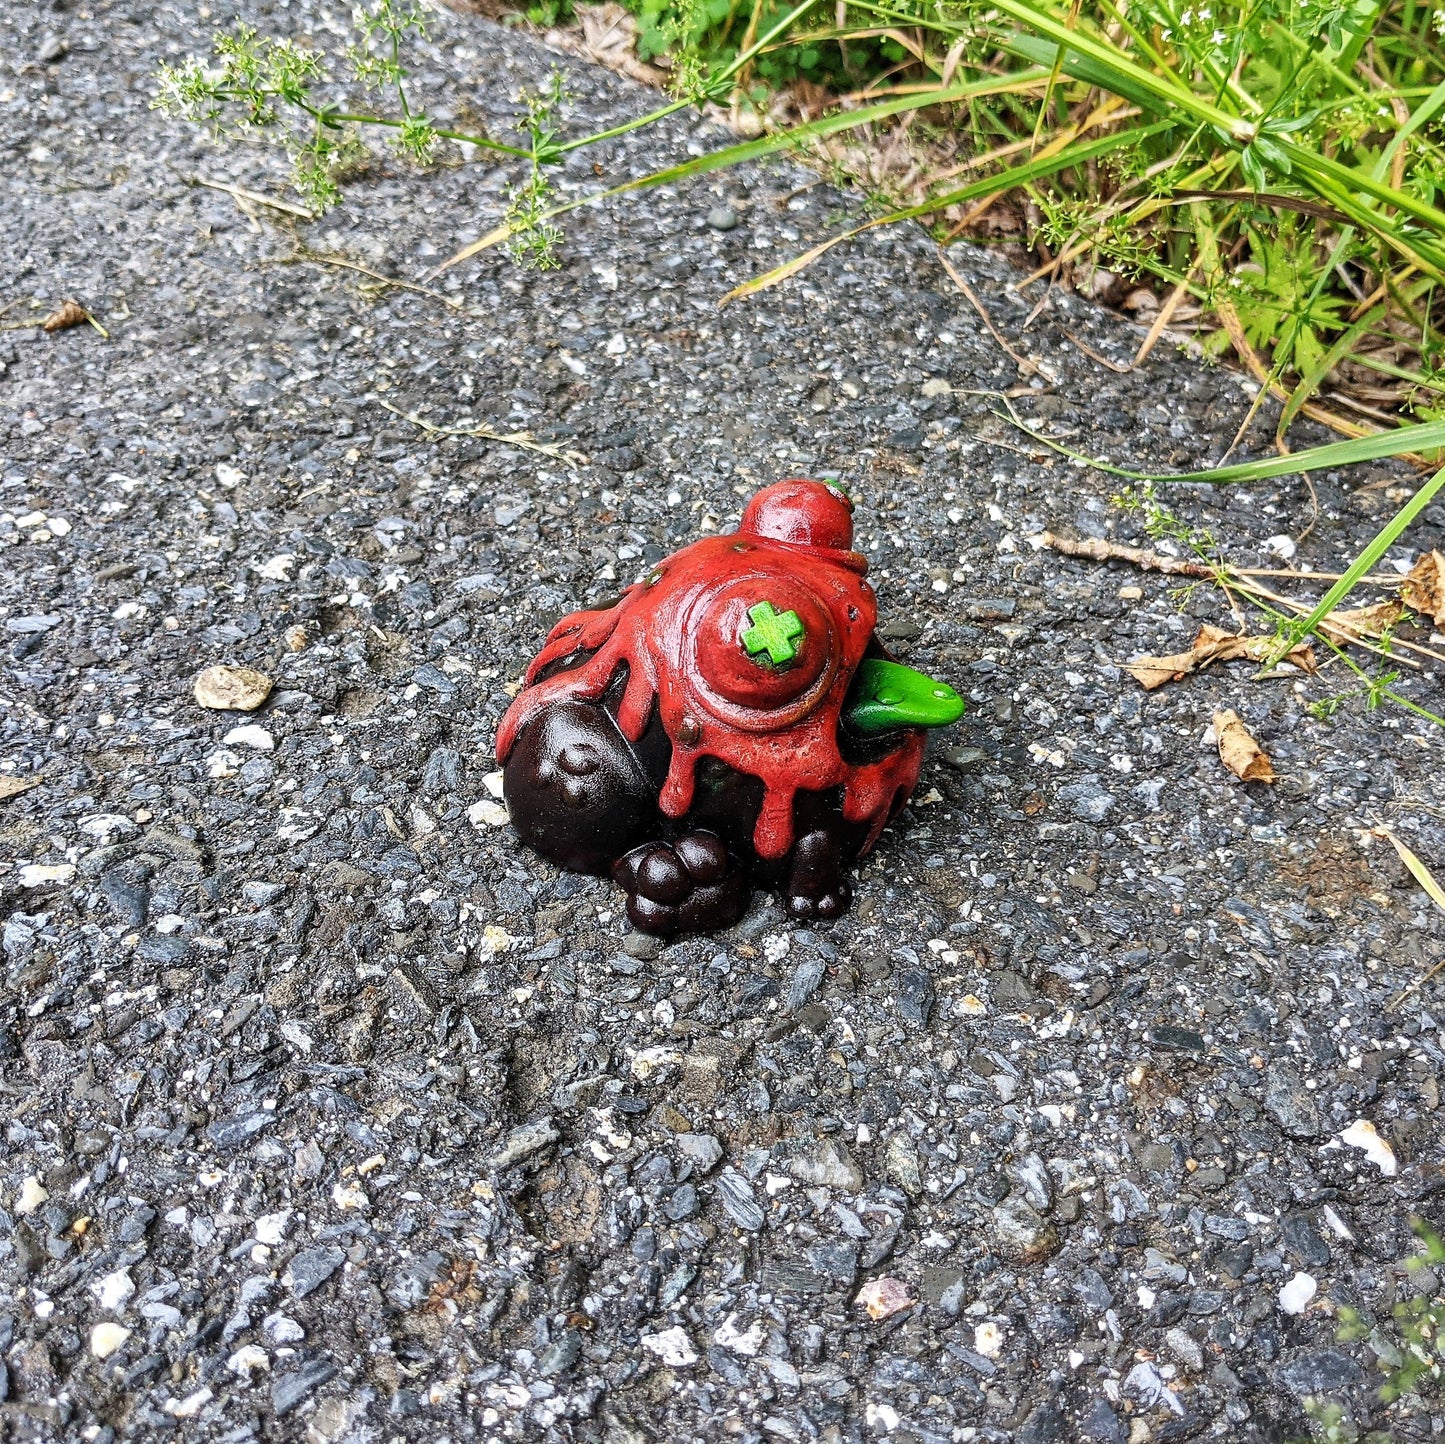 SUNS OUT BUNS OUT Custom 1 of 1 Ributt Vinyl Figure: "Bleeding Frog" by Resin Rookie